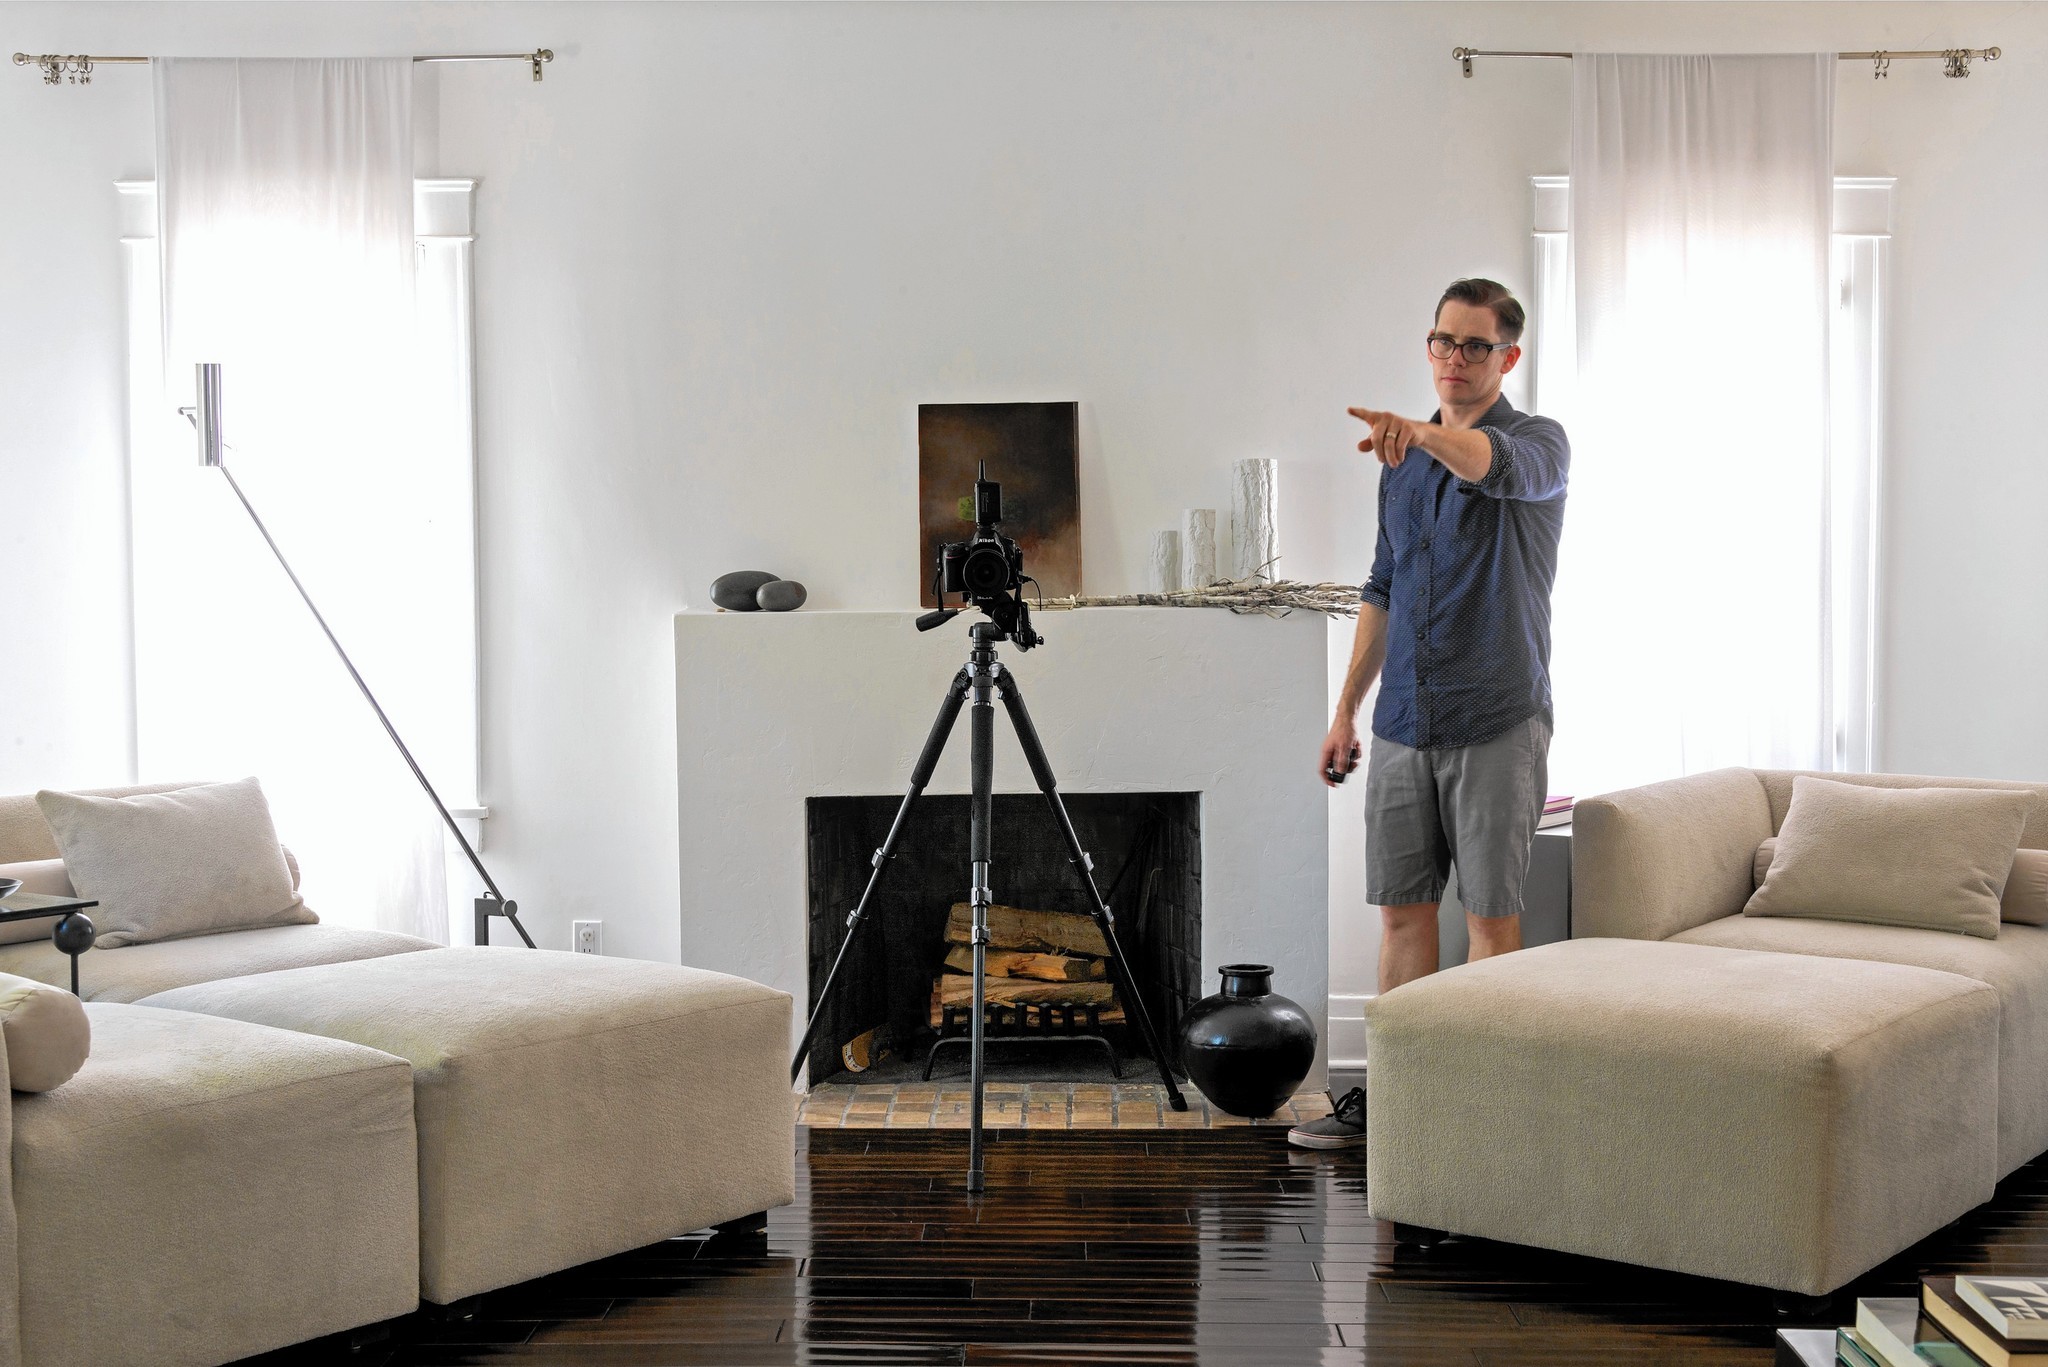 Pro Photographers Labor To Show Properties In A Better